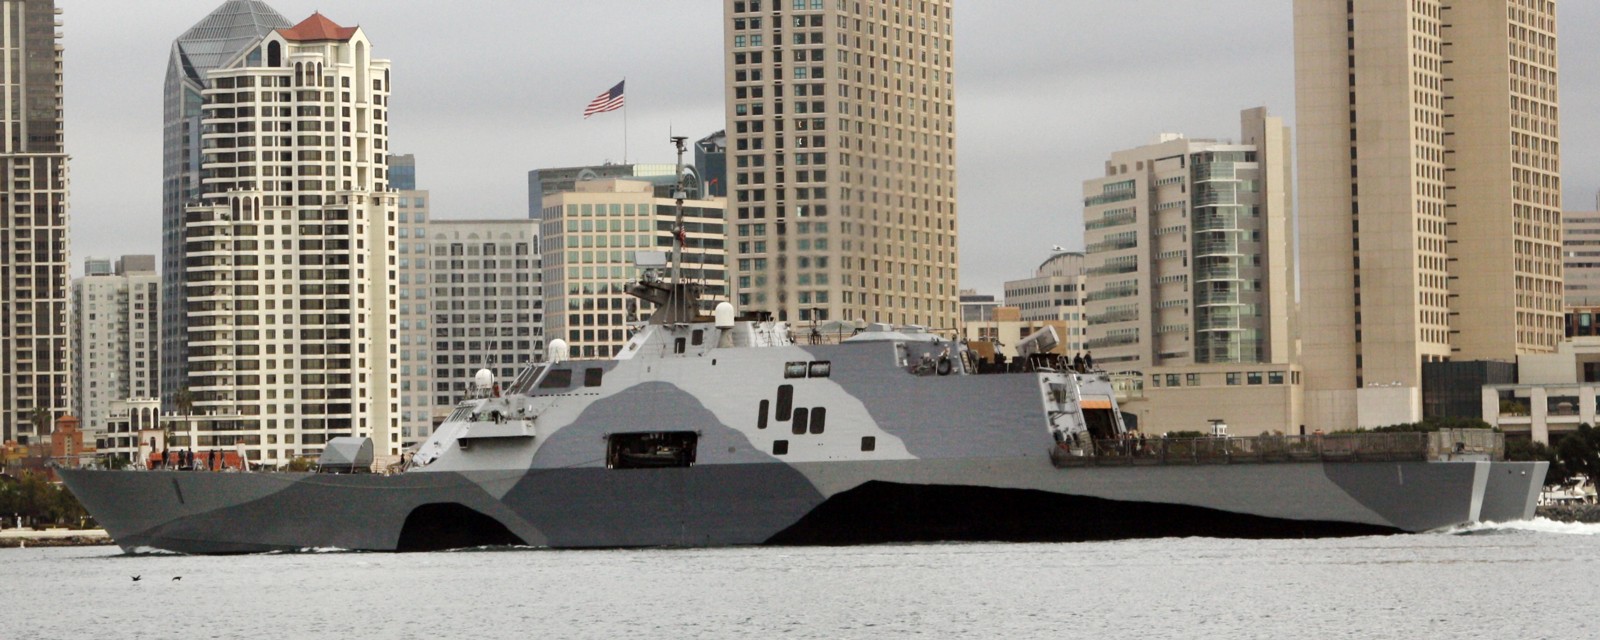 lcs-1 uss freedom class littoral combat ship us navy 56 san diego